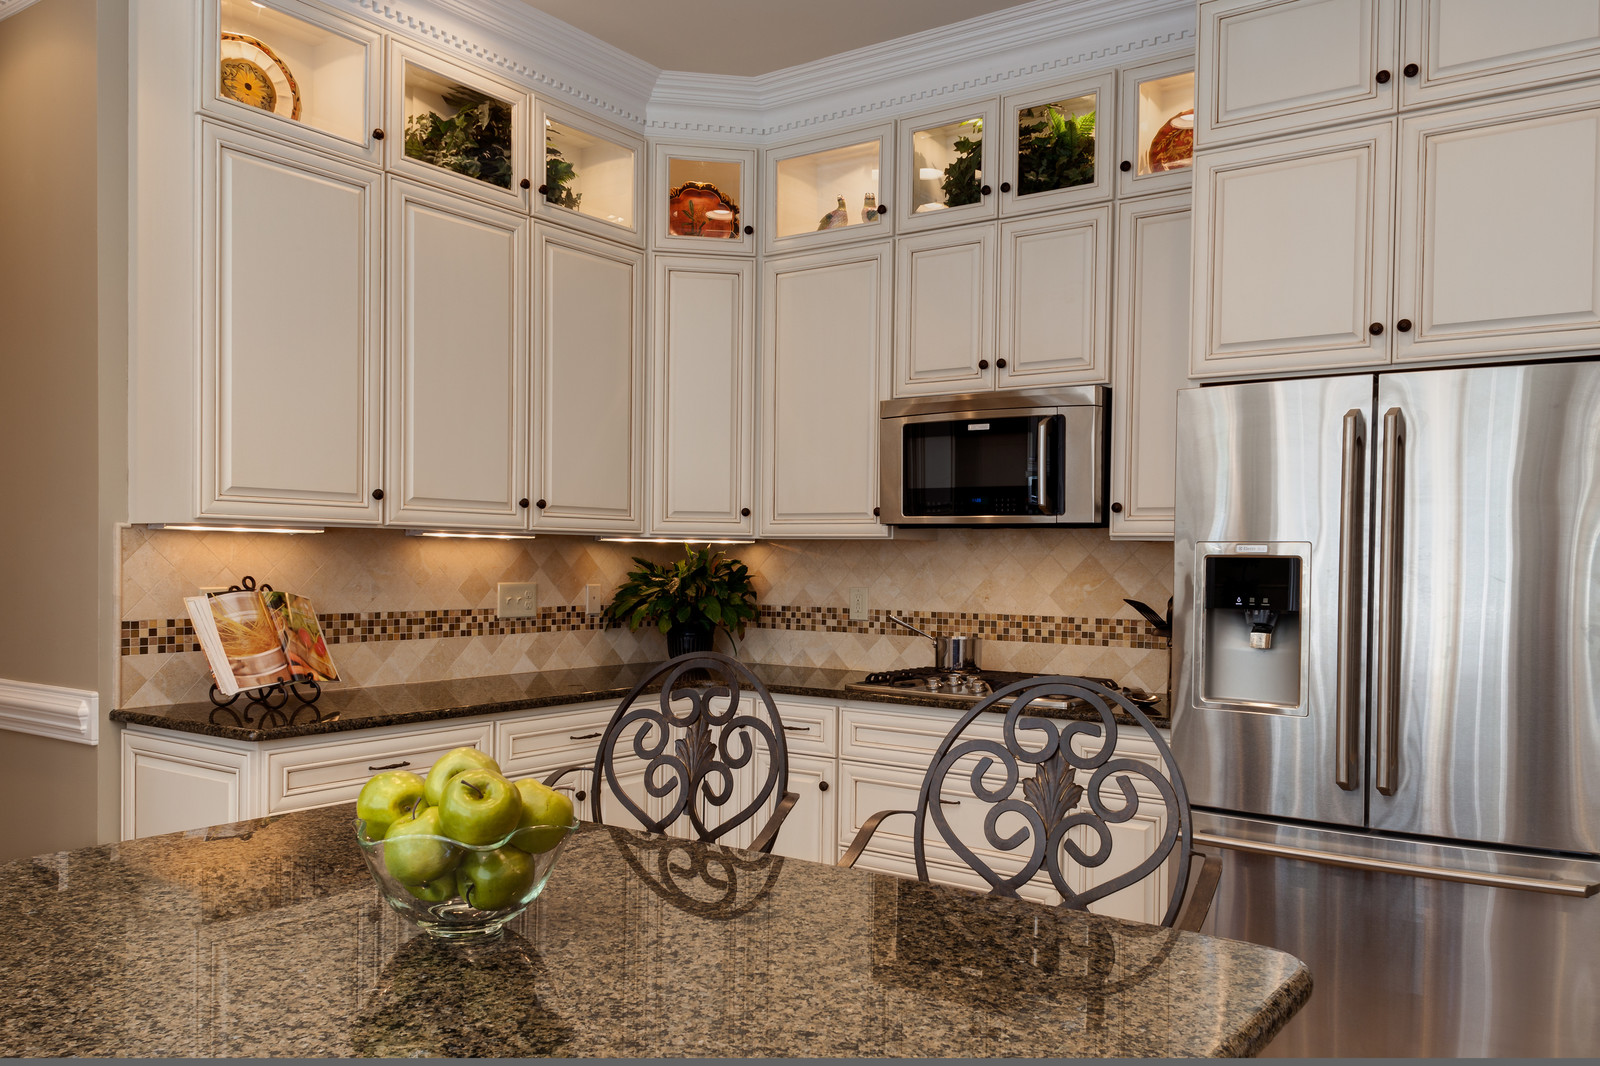 12 Most Elegant White Cabinets with Brown Granite You Must Look Before